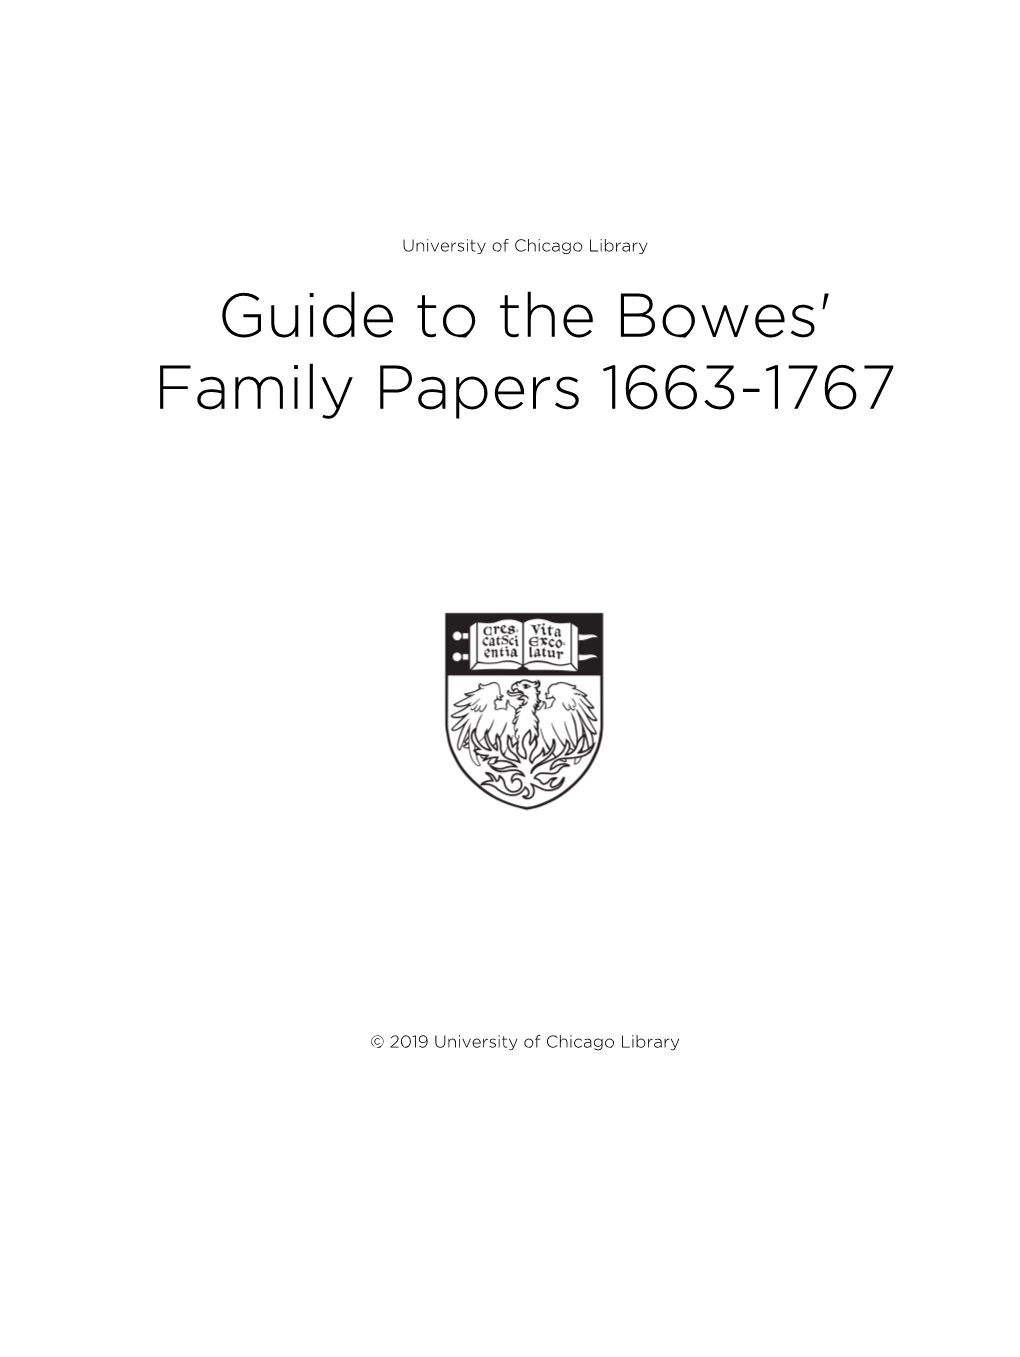 Guide to the Bowes' Family Papers 1663-1767